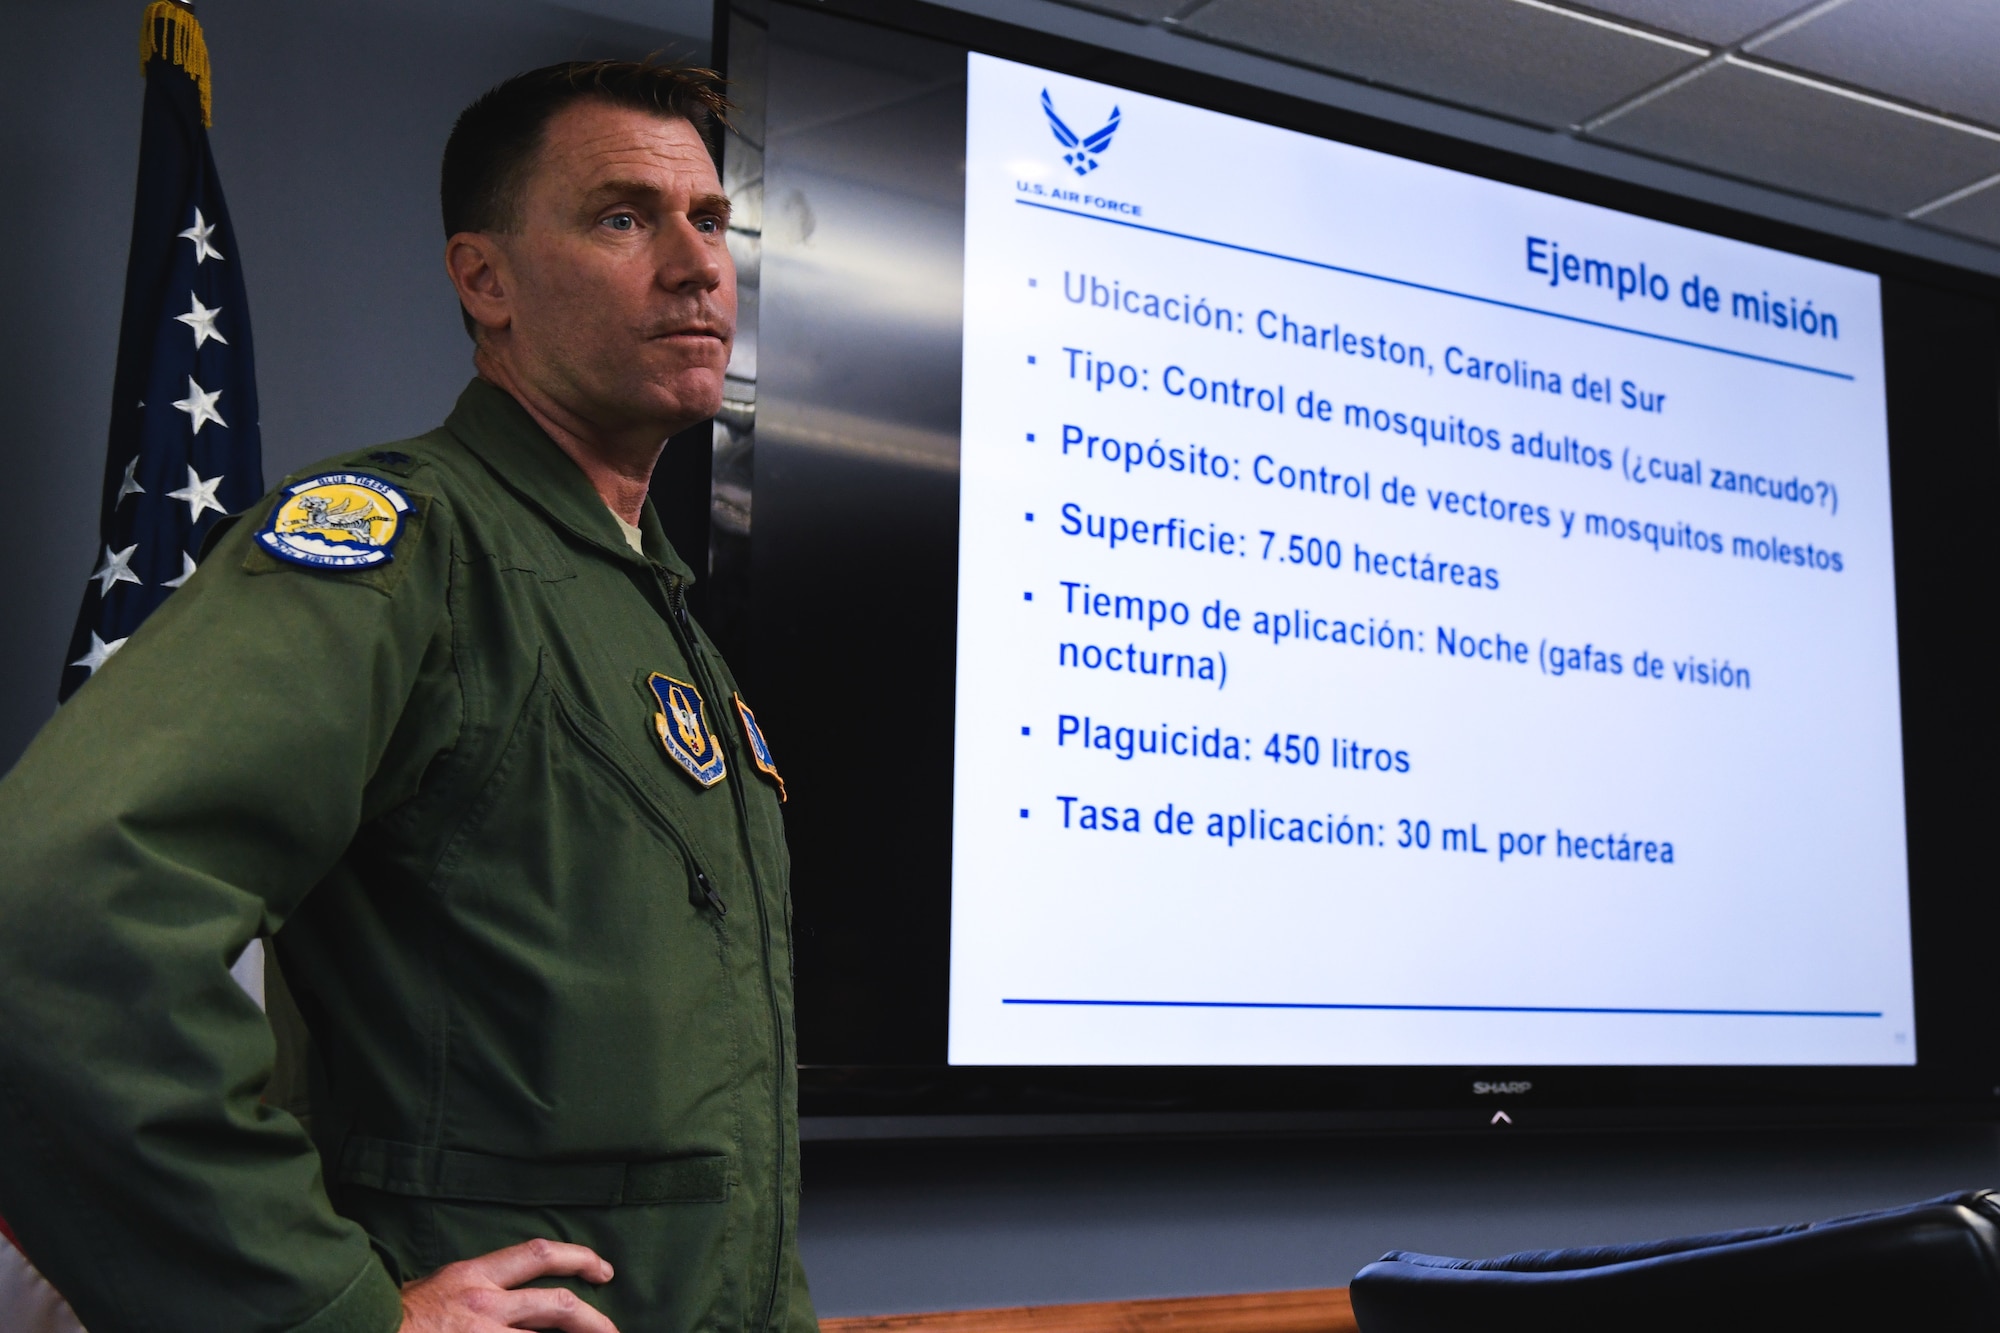 Lt. Col. Mark Breidenbaugh, chief entomologist of the 910th Airlift Wing’s aerial spray flight and international health specialist, provides information on the 910th Airlift Wing’s aerial spray mission, in Spanish, June 17, 2019, here.